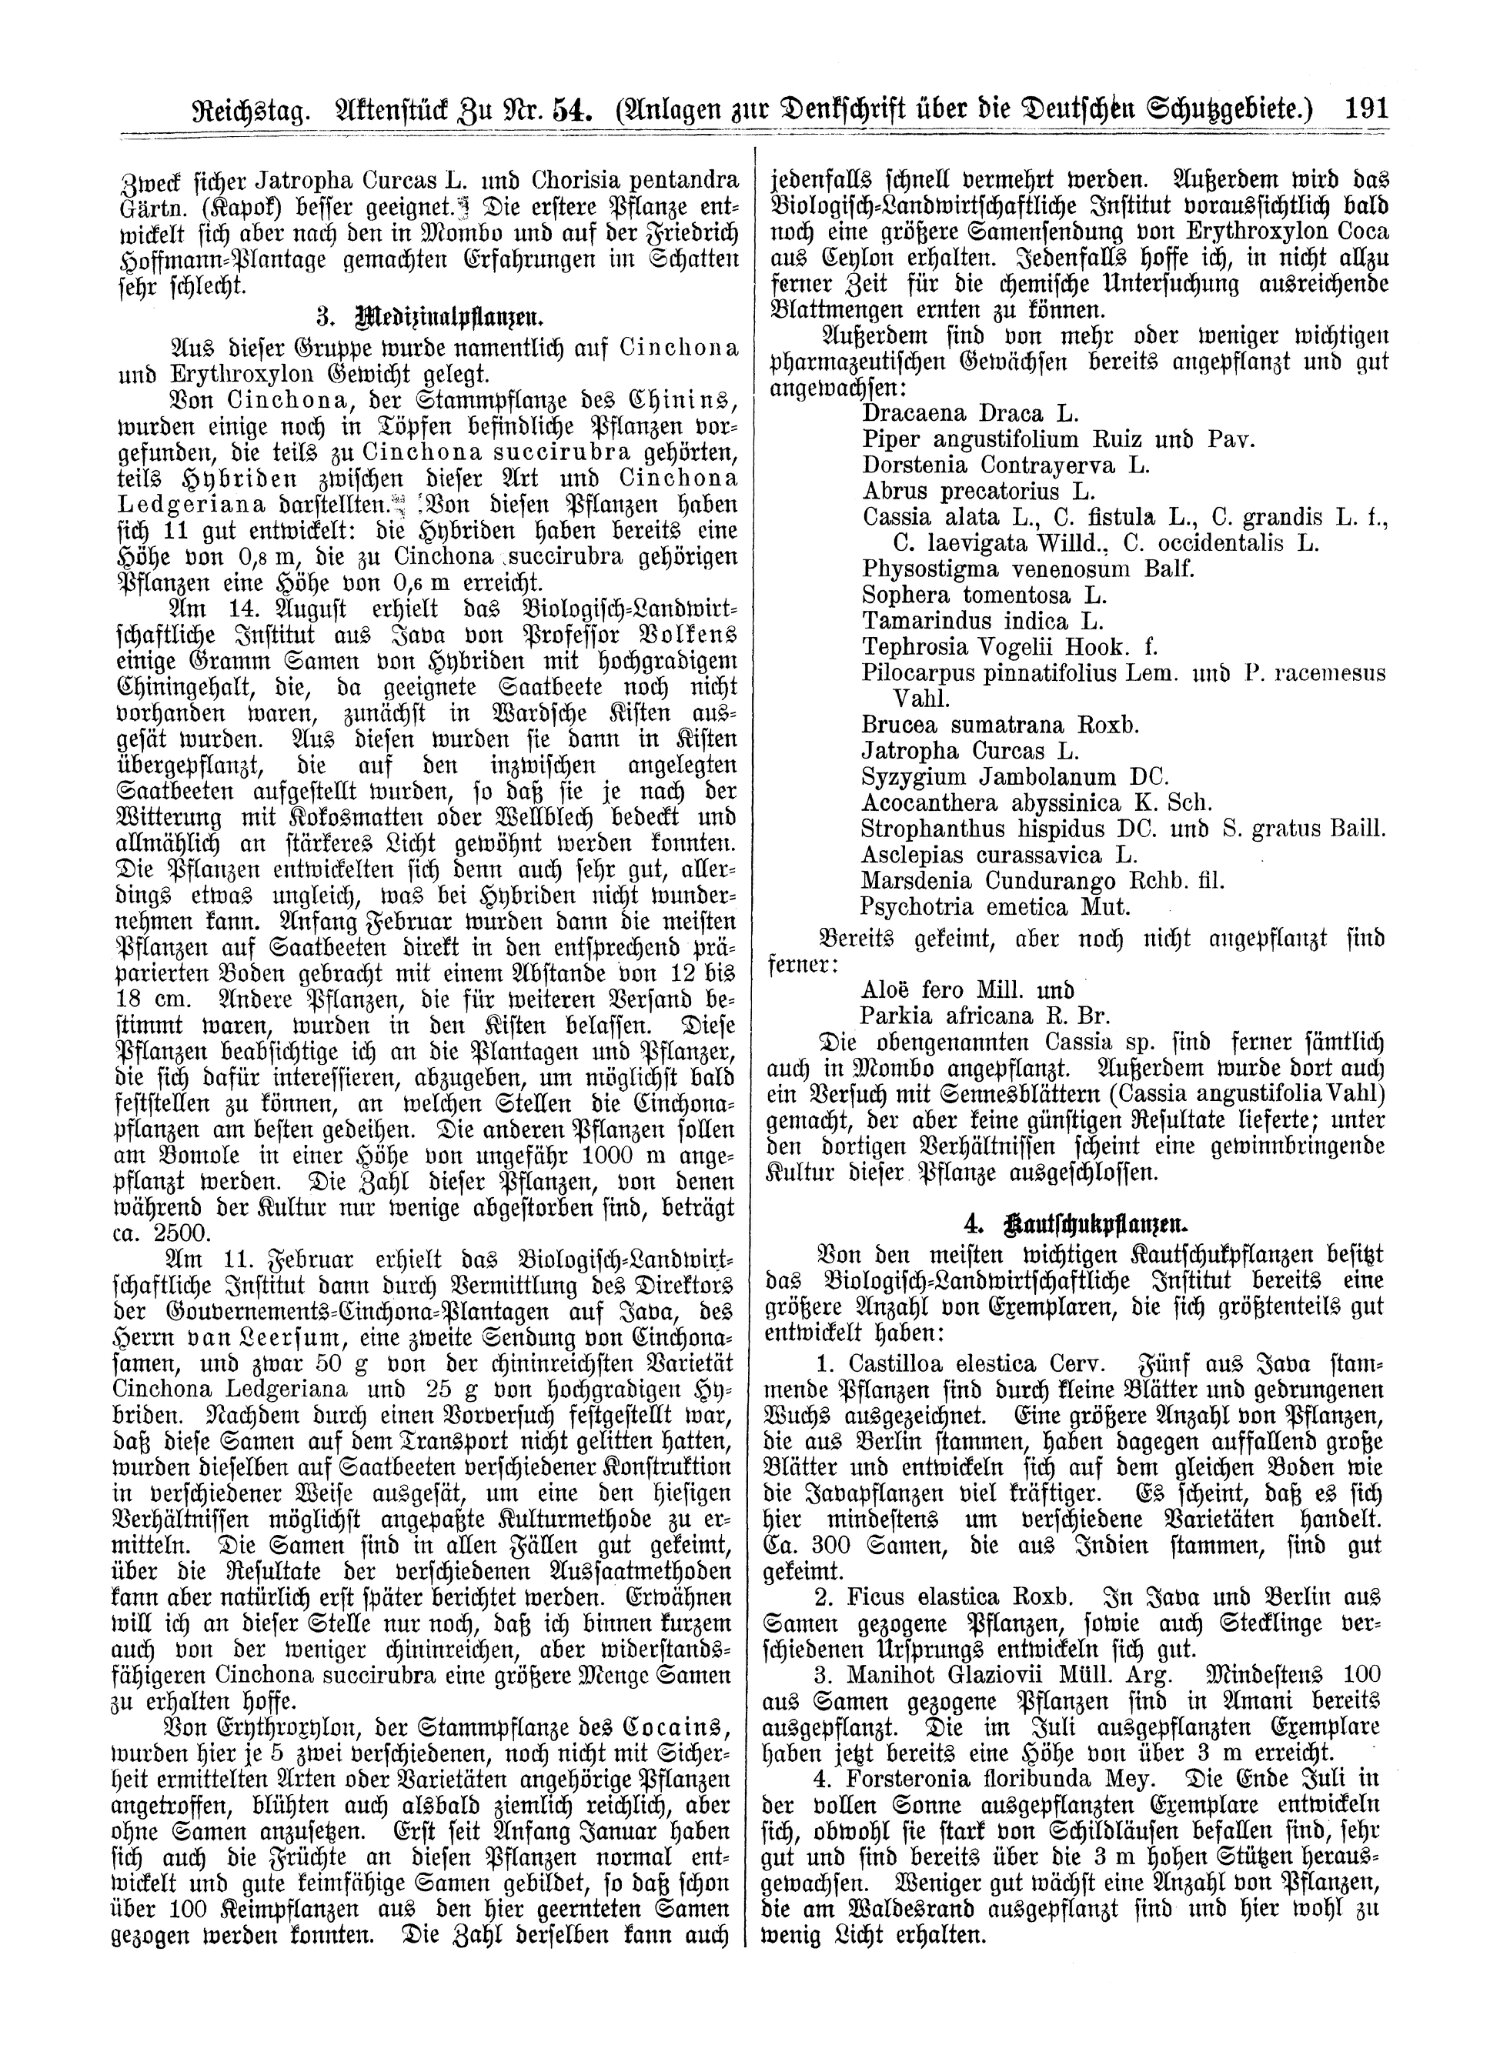 Scan of page 191